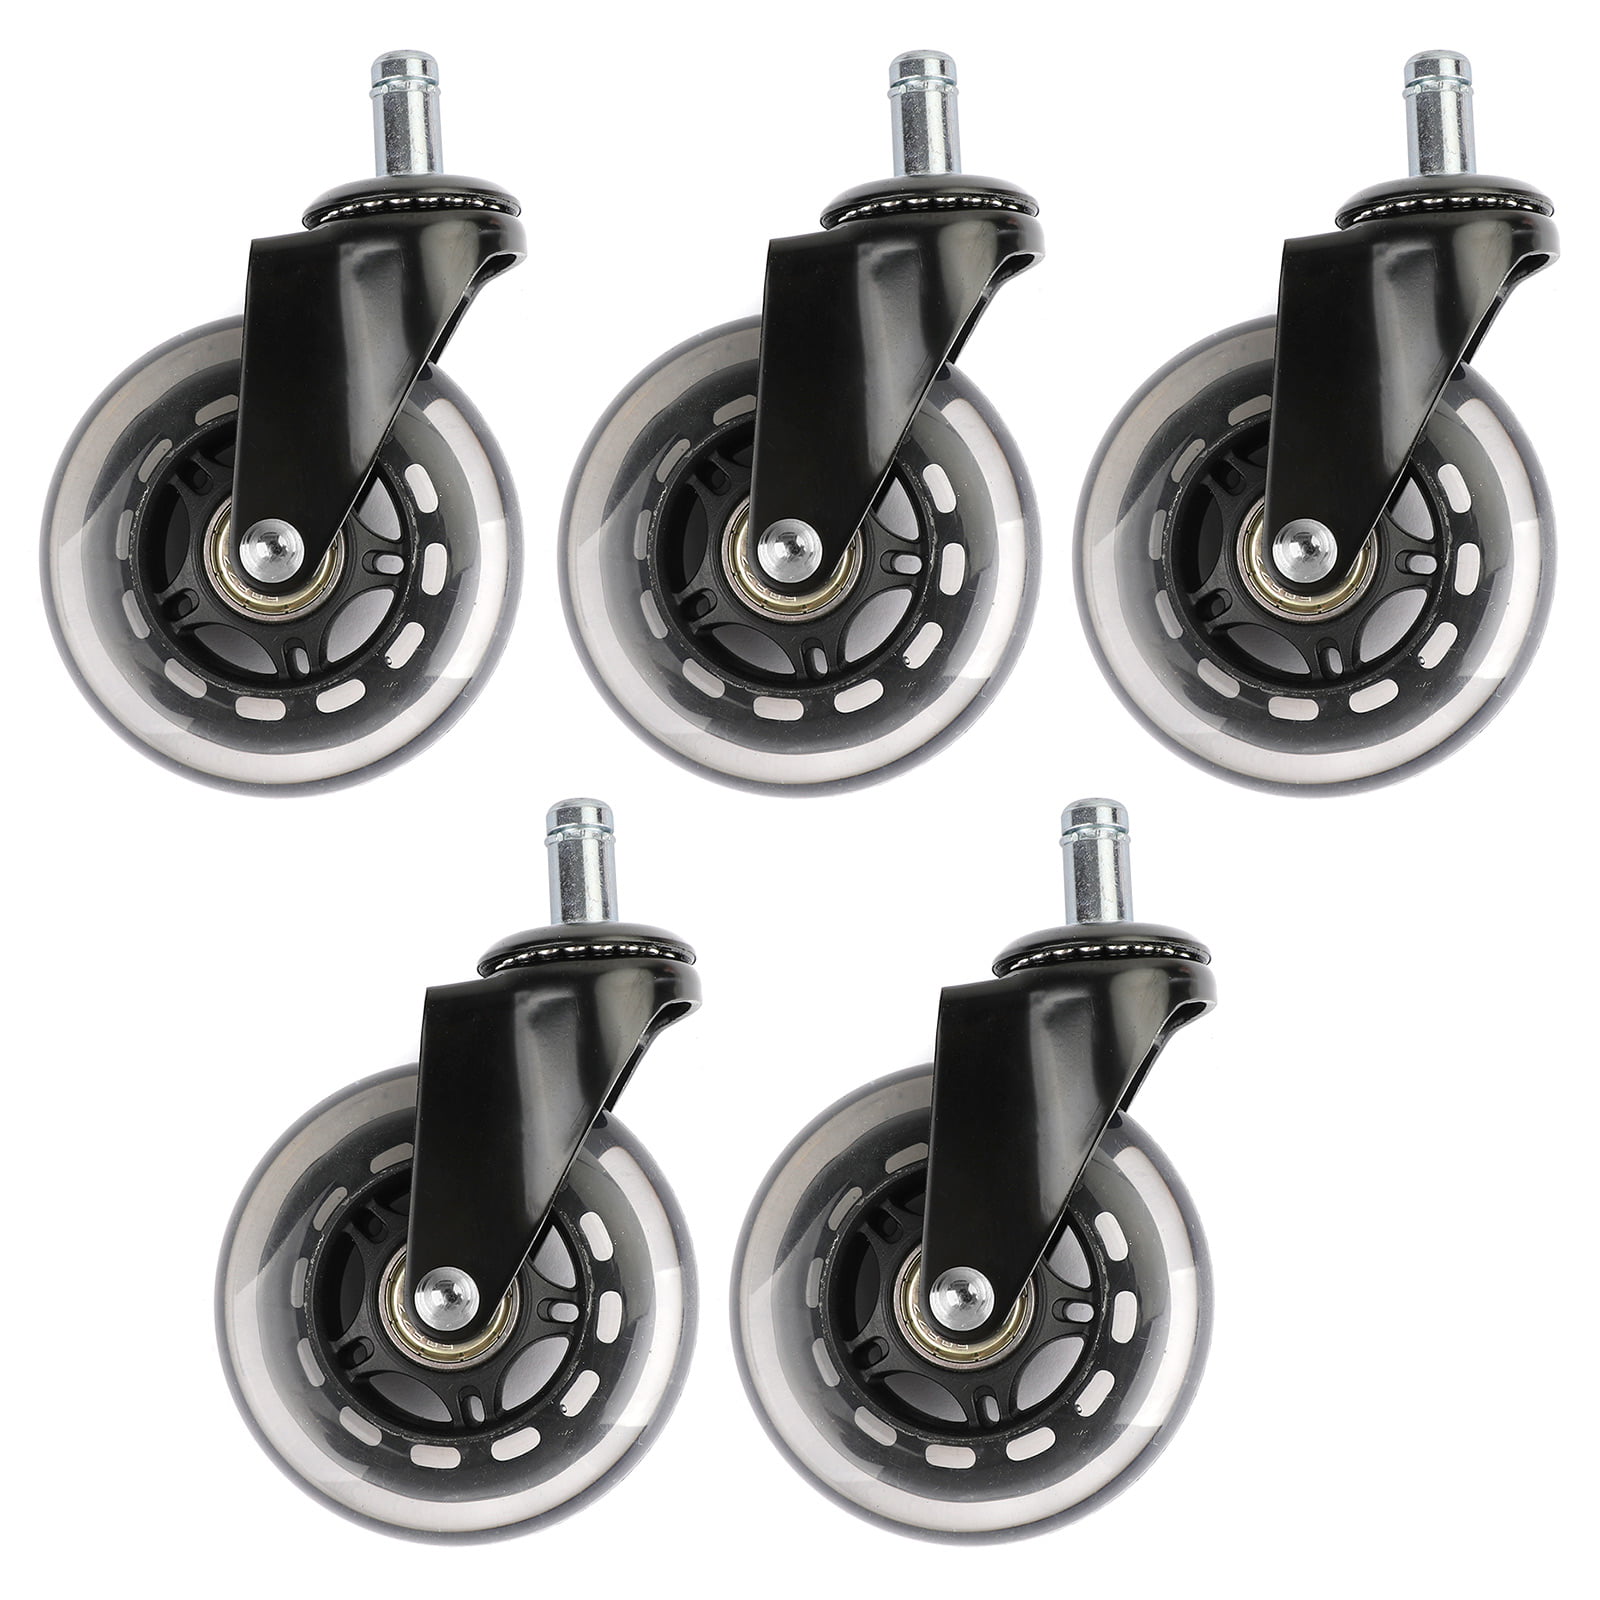 Rollerblade Style Caster Wheels Replacement for Office Chair Heavy Duty Swivel Chair Set of 5, Black Floor Protecting by Mastery Mart Universal Stem Size Quiet Smooth on Floors 